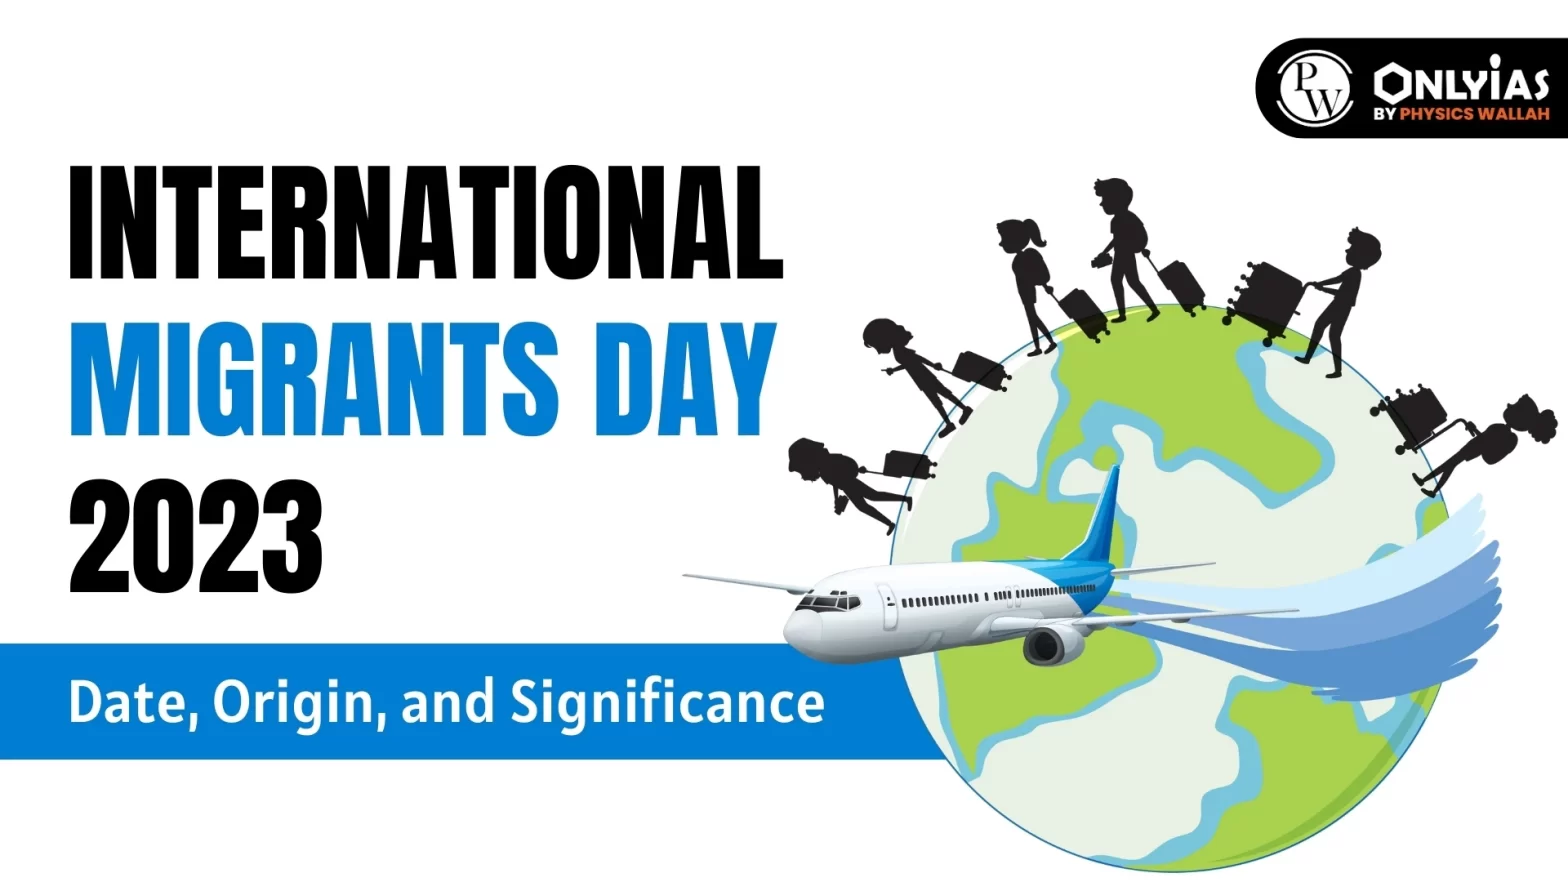 International Migrants Day 2023: Date, Origin, and Significance